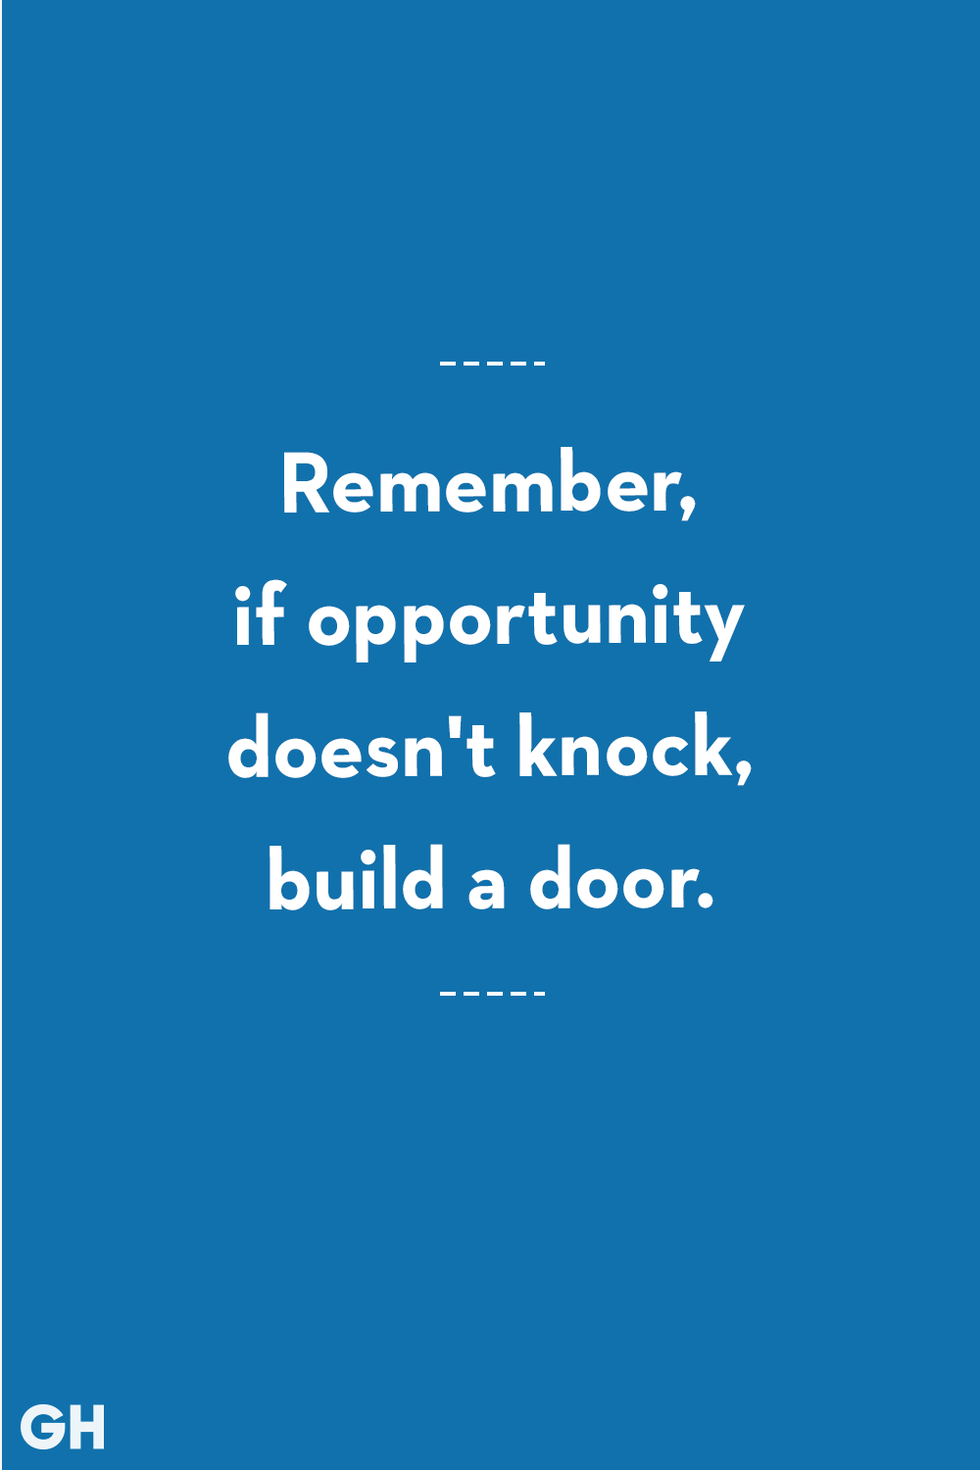 remember, if opportunity doesn't knock, build a door graduation saying on a blue background